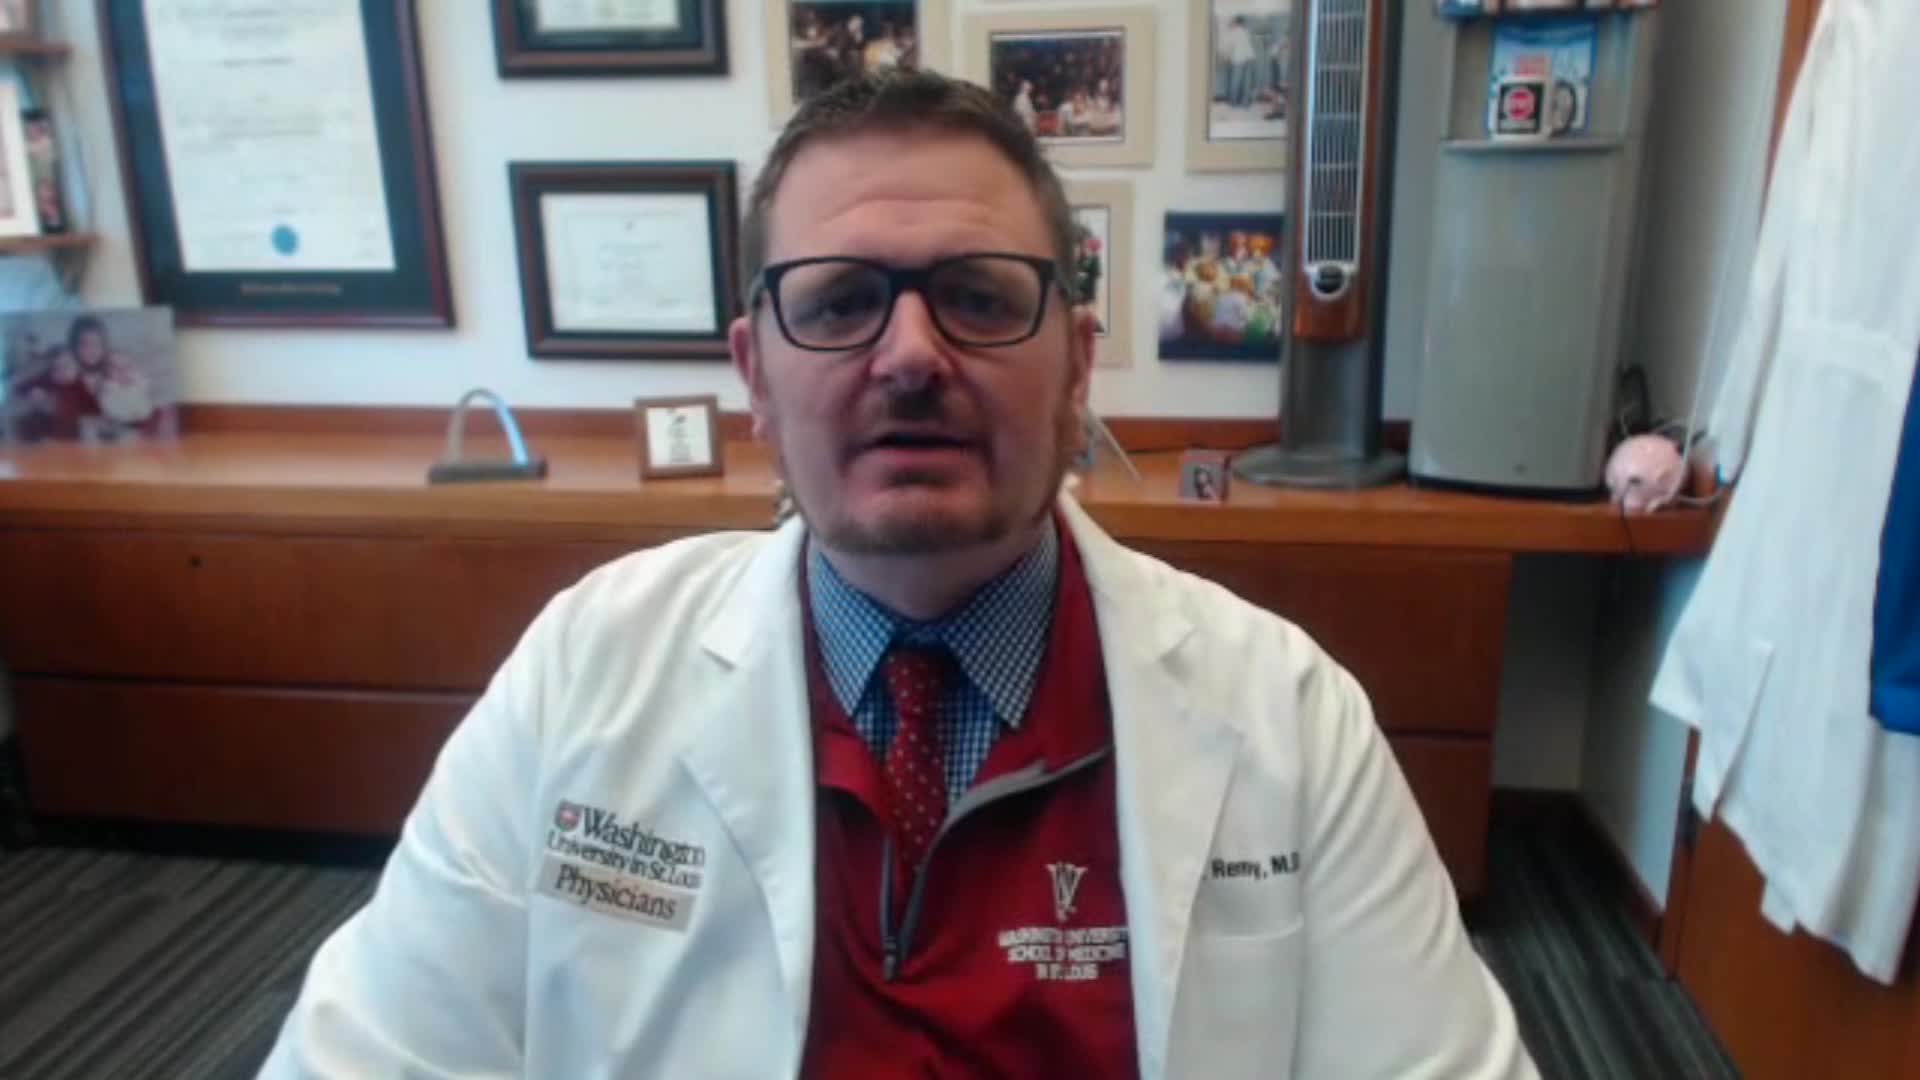 Dr. Ken Remy, a St. Louis critical care physician, speaks during an interview on November 25.